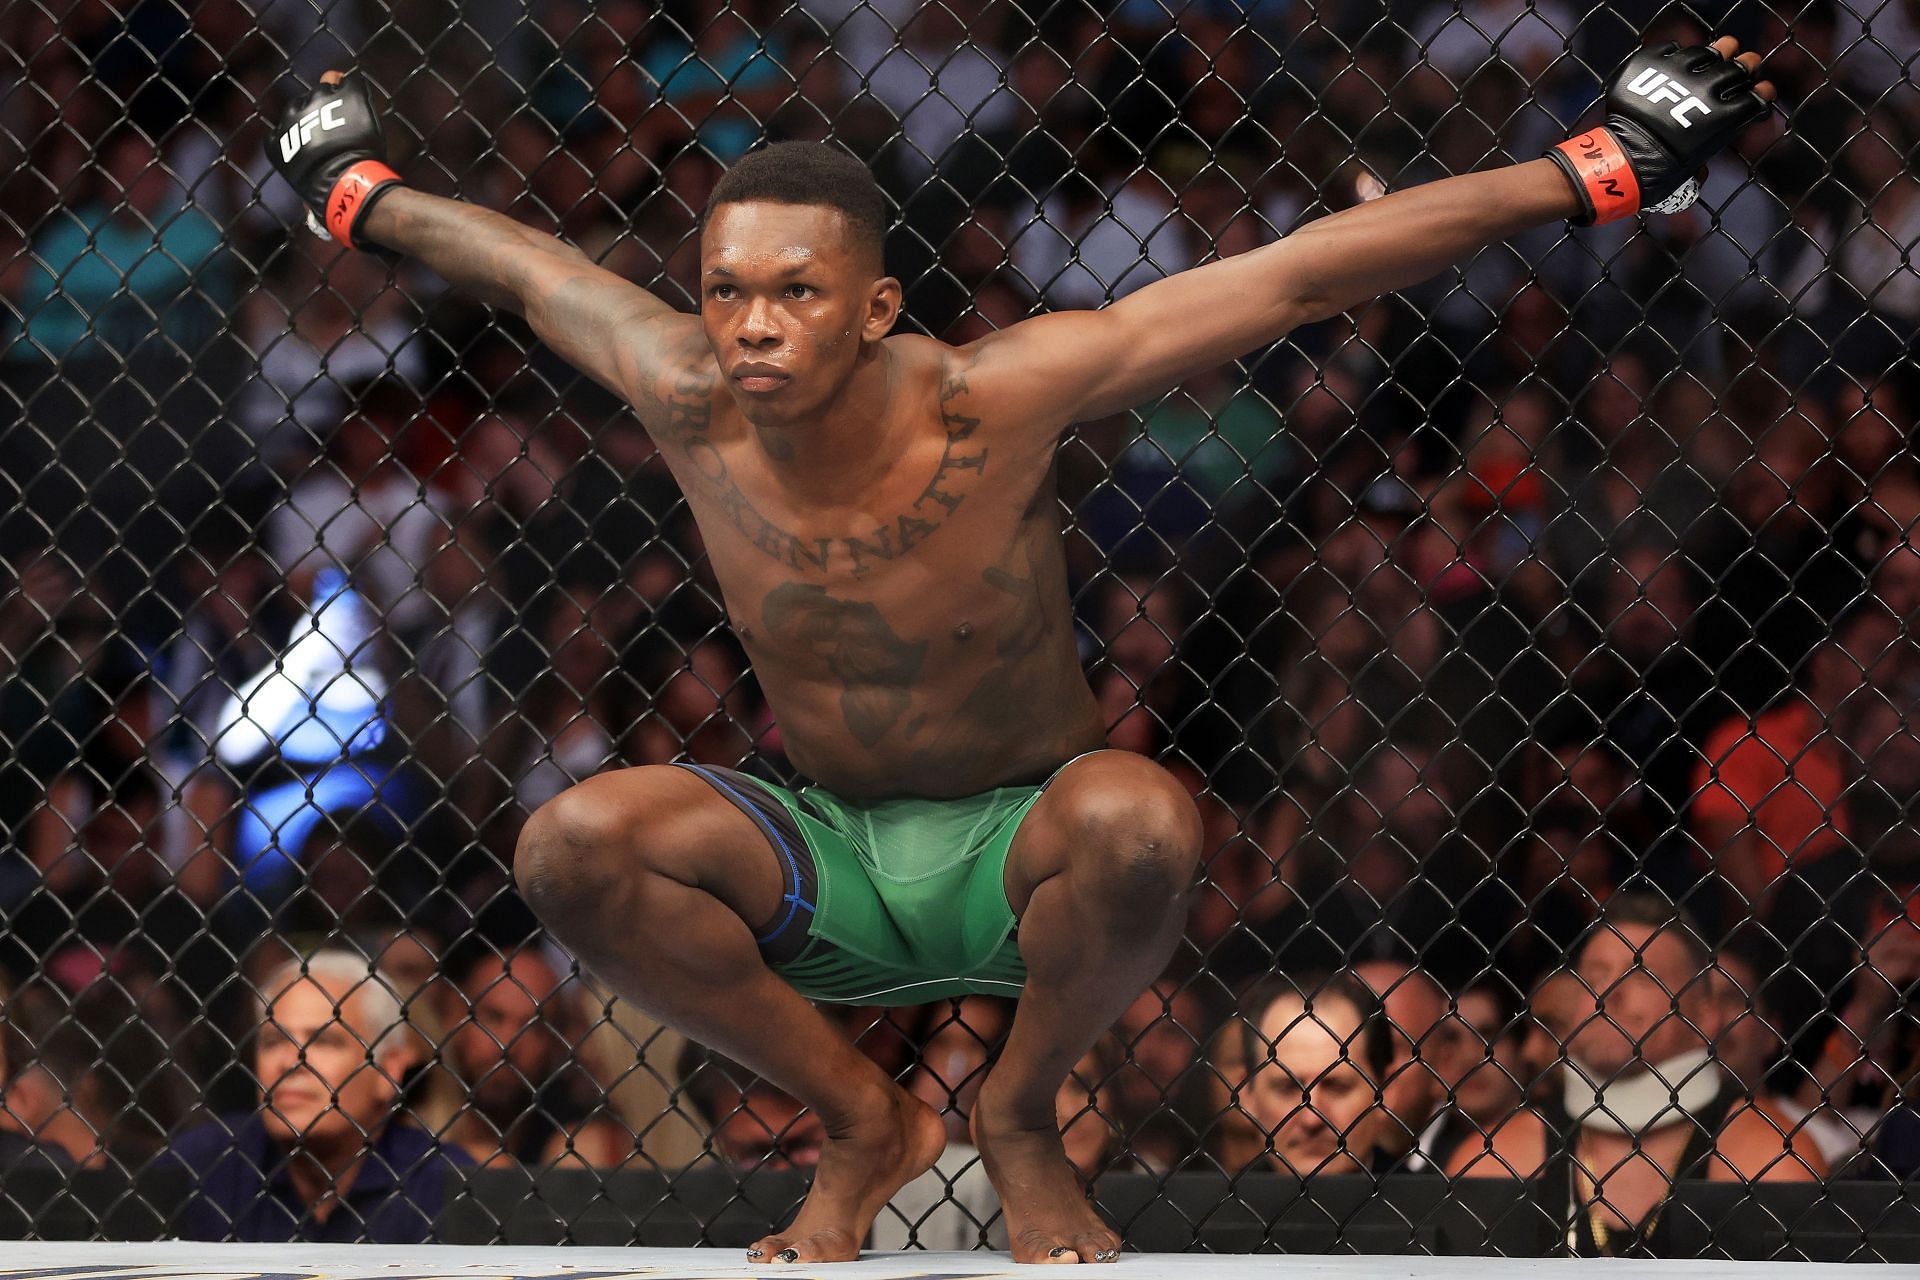 Can Israel Adesanya avenge his two kickboxing losses to Alex Pereira this weekend?